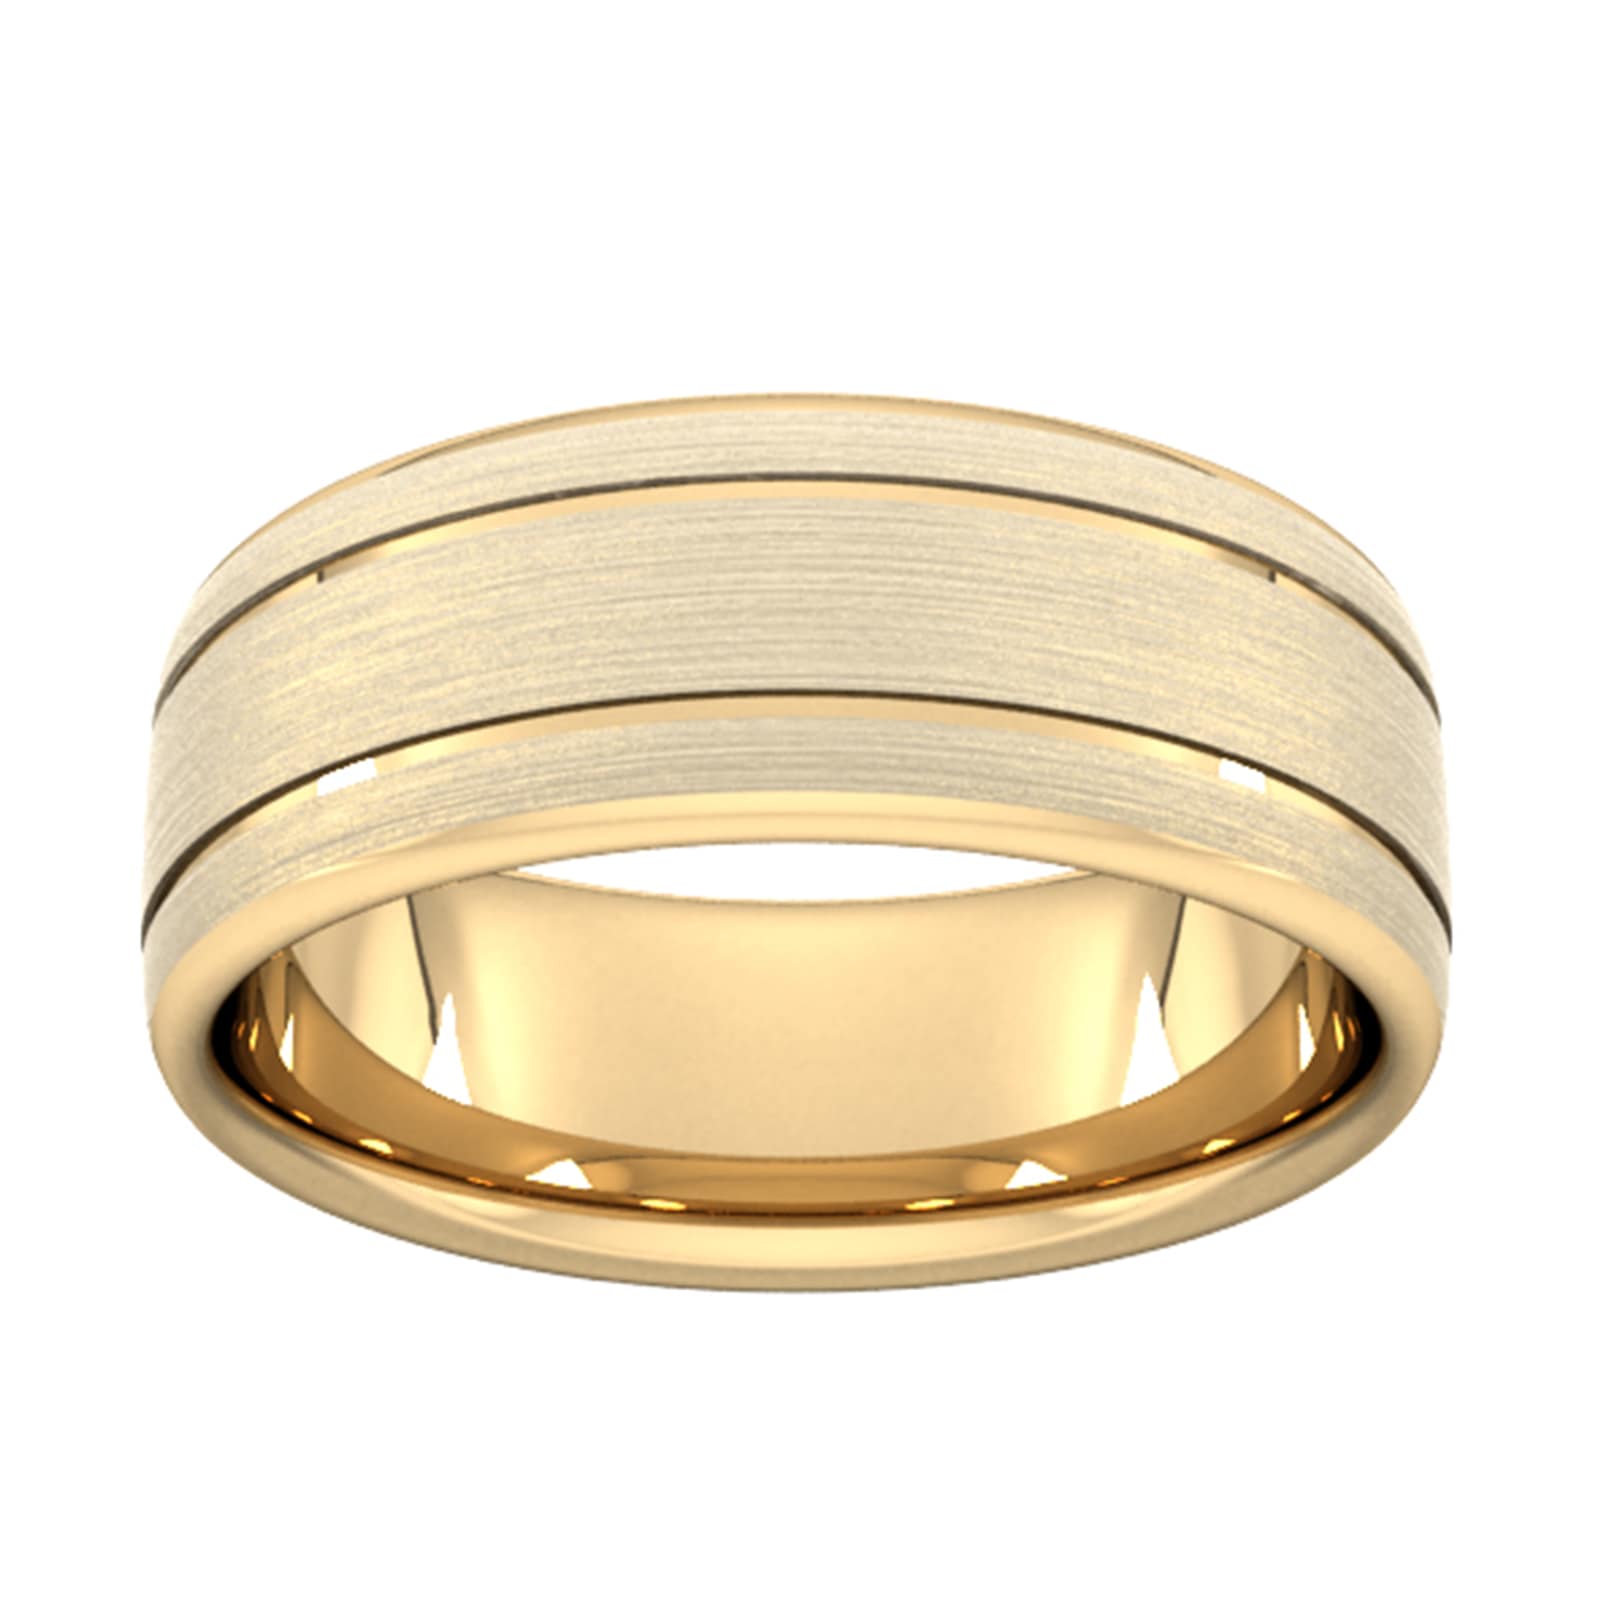 8mm D Shape Heavy Matt Finish With Double Grooves Wedding Ring In 18 Carat Yellow Gold - Ring Size T